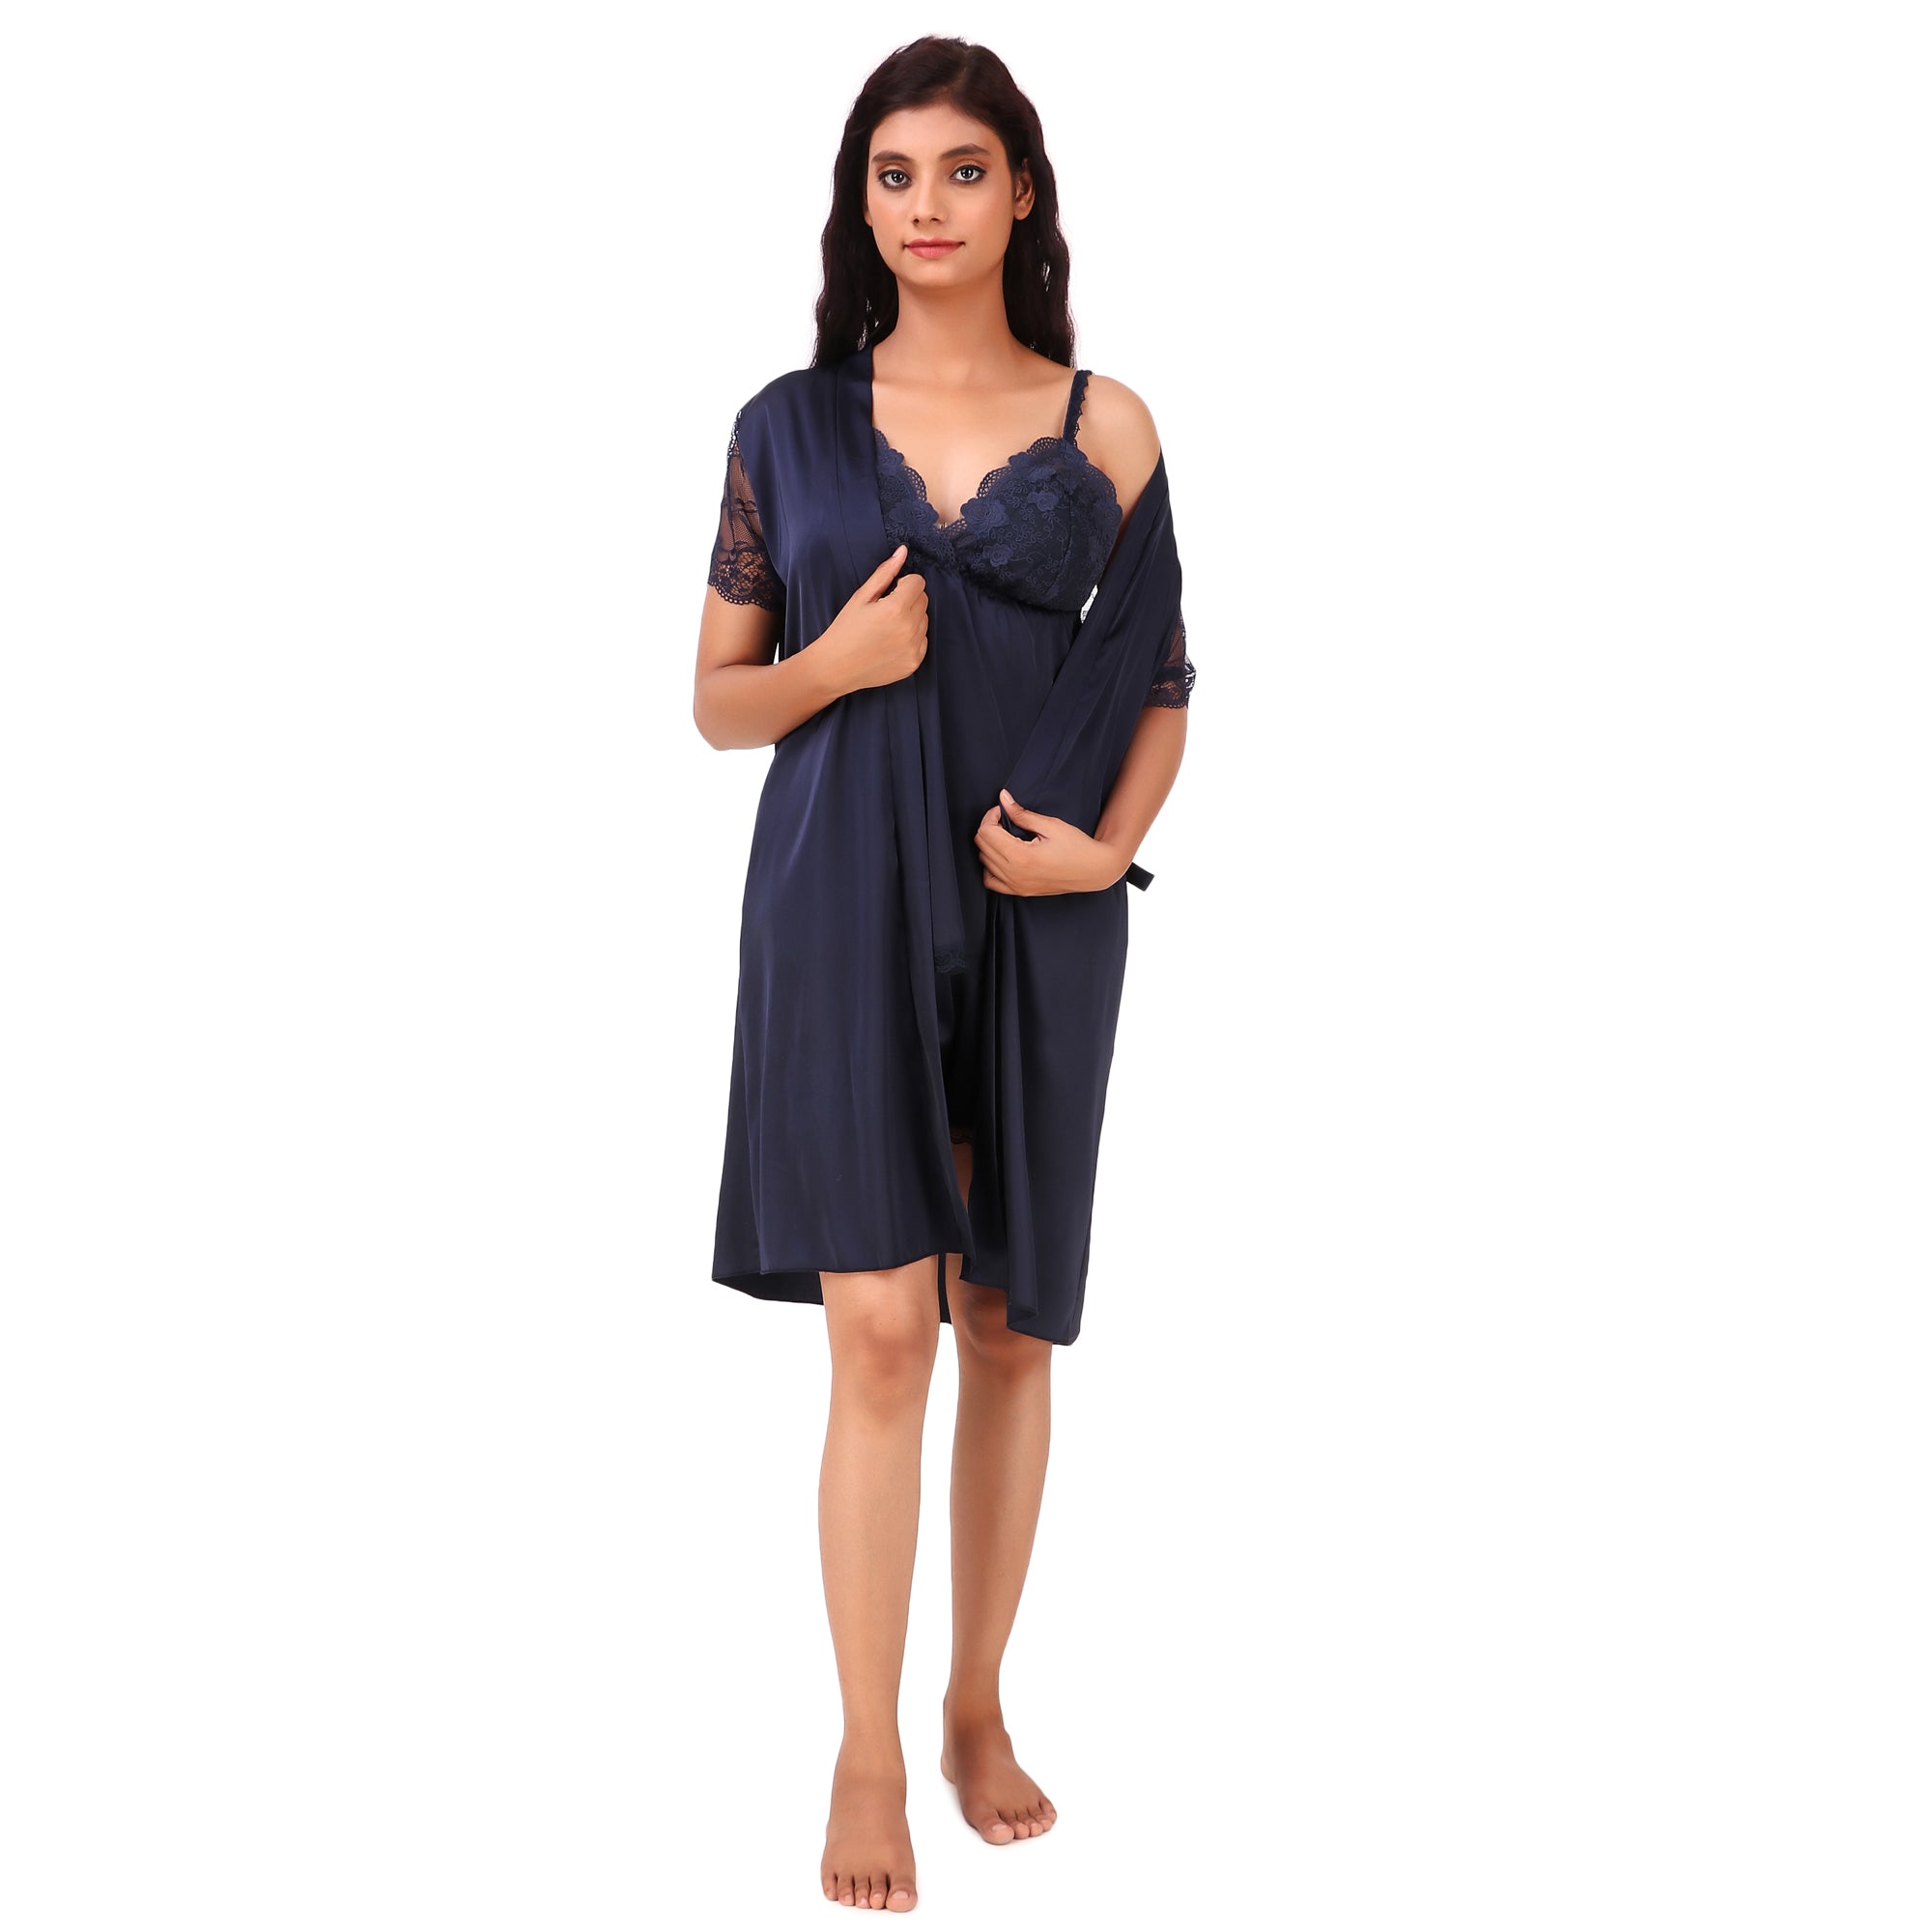 AXTZH-XNSS3P004 luxuriously Smooth satin Night Gown shorts set with soft lace Accents - 3 pcs set.